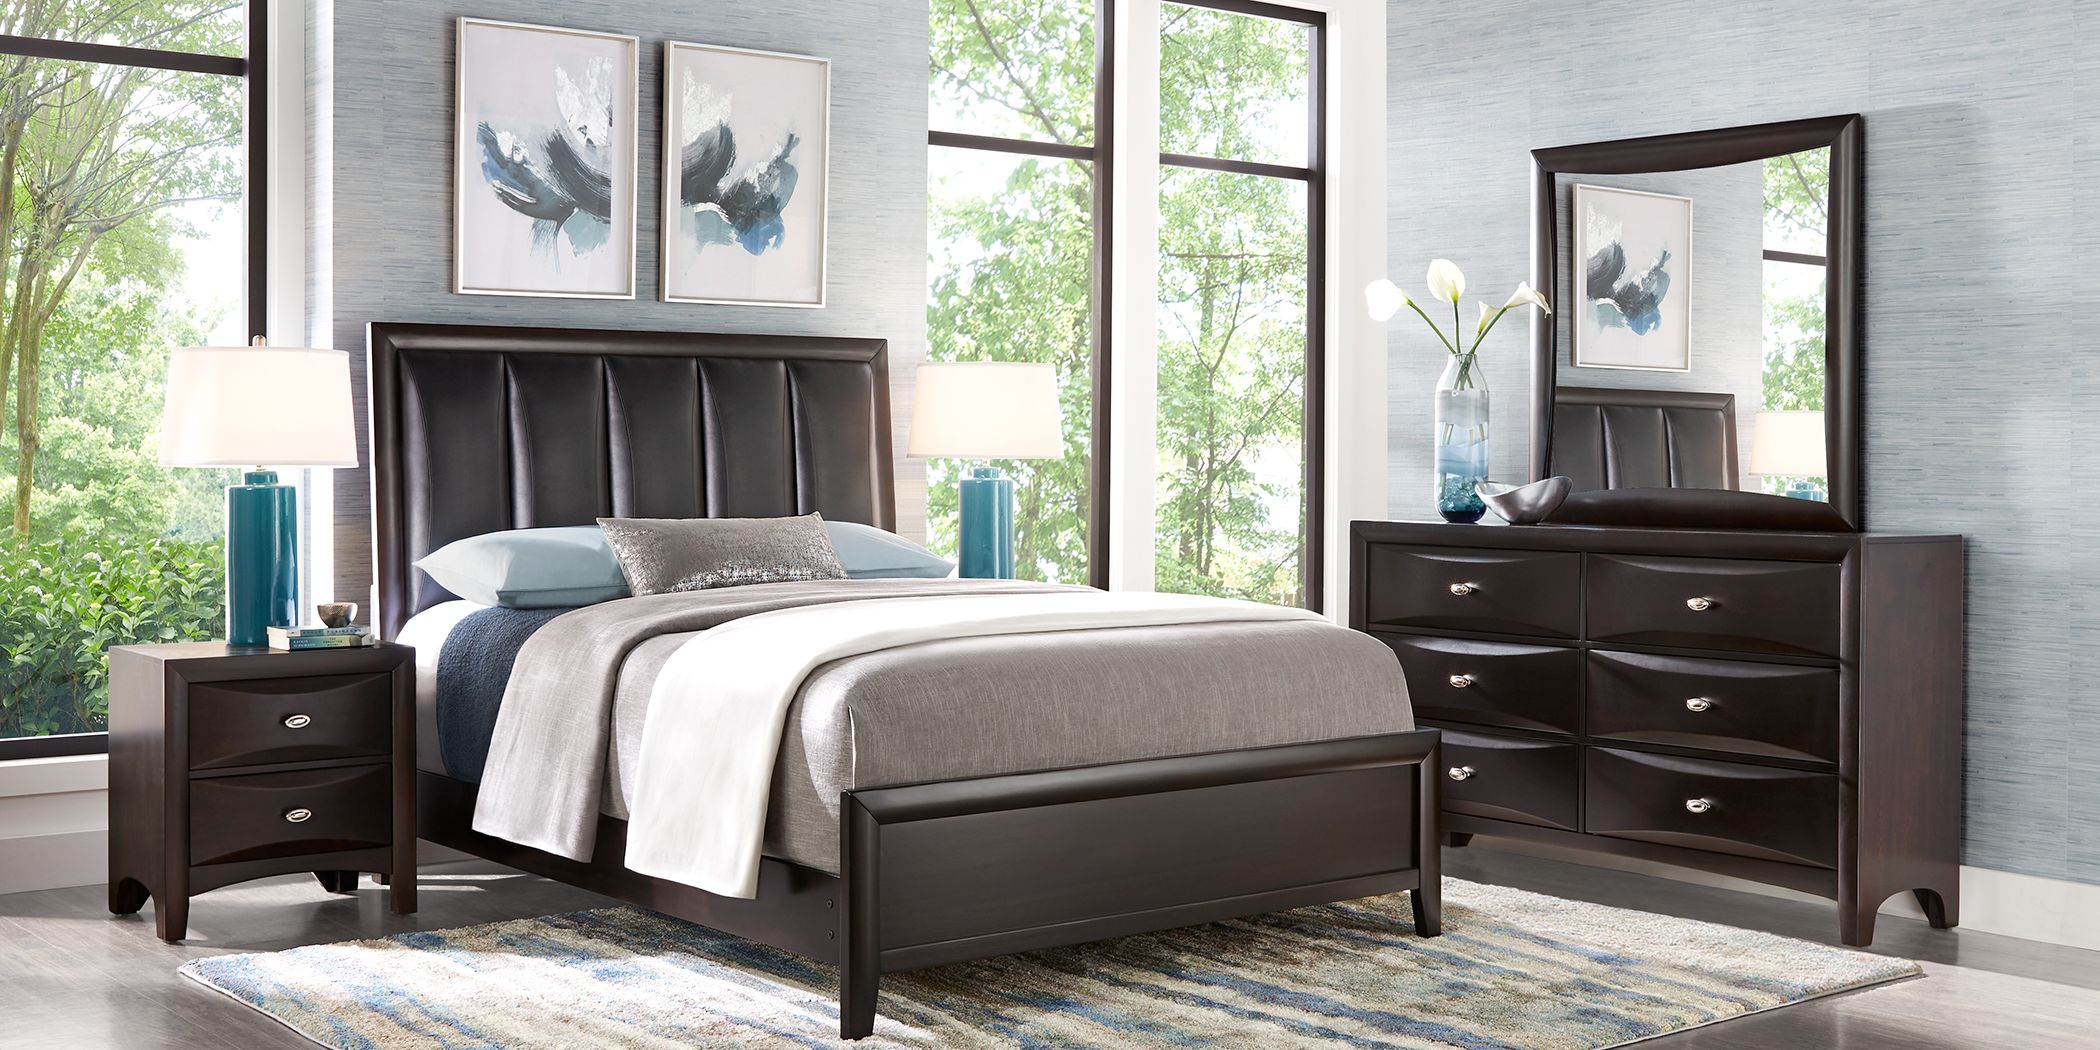 Bedroom Furniture Rooms To, Futon Bunk Bed Rooms To Go